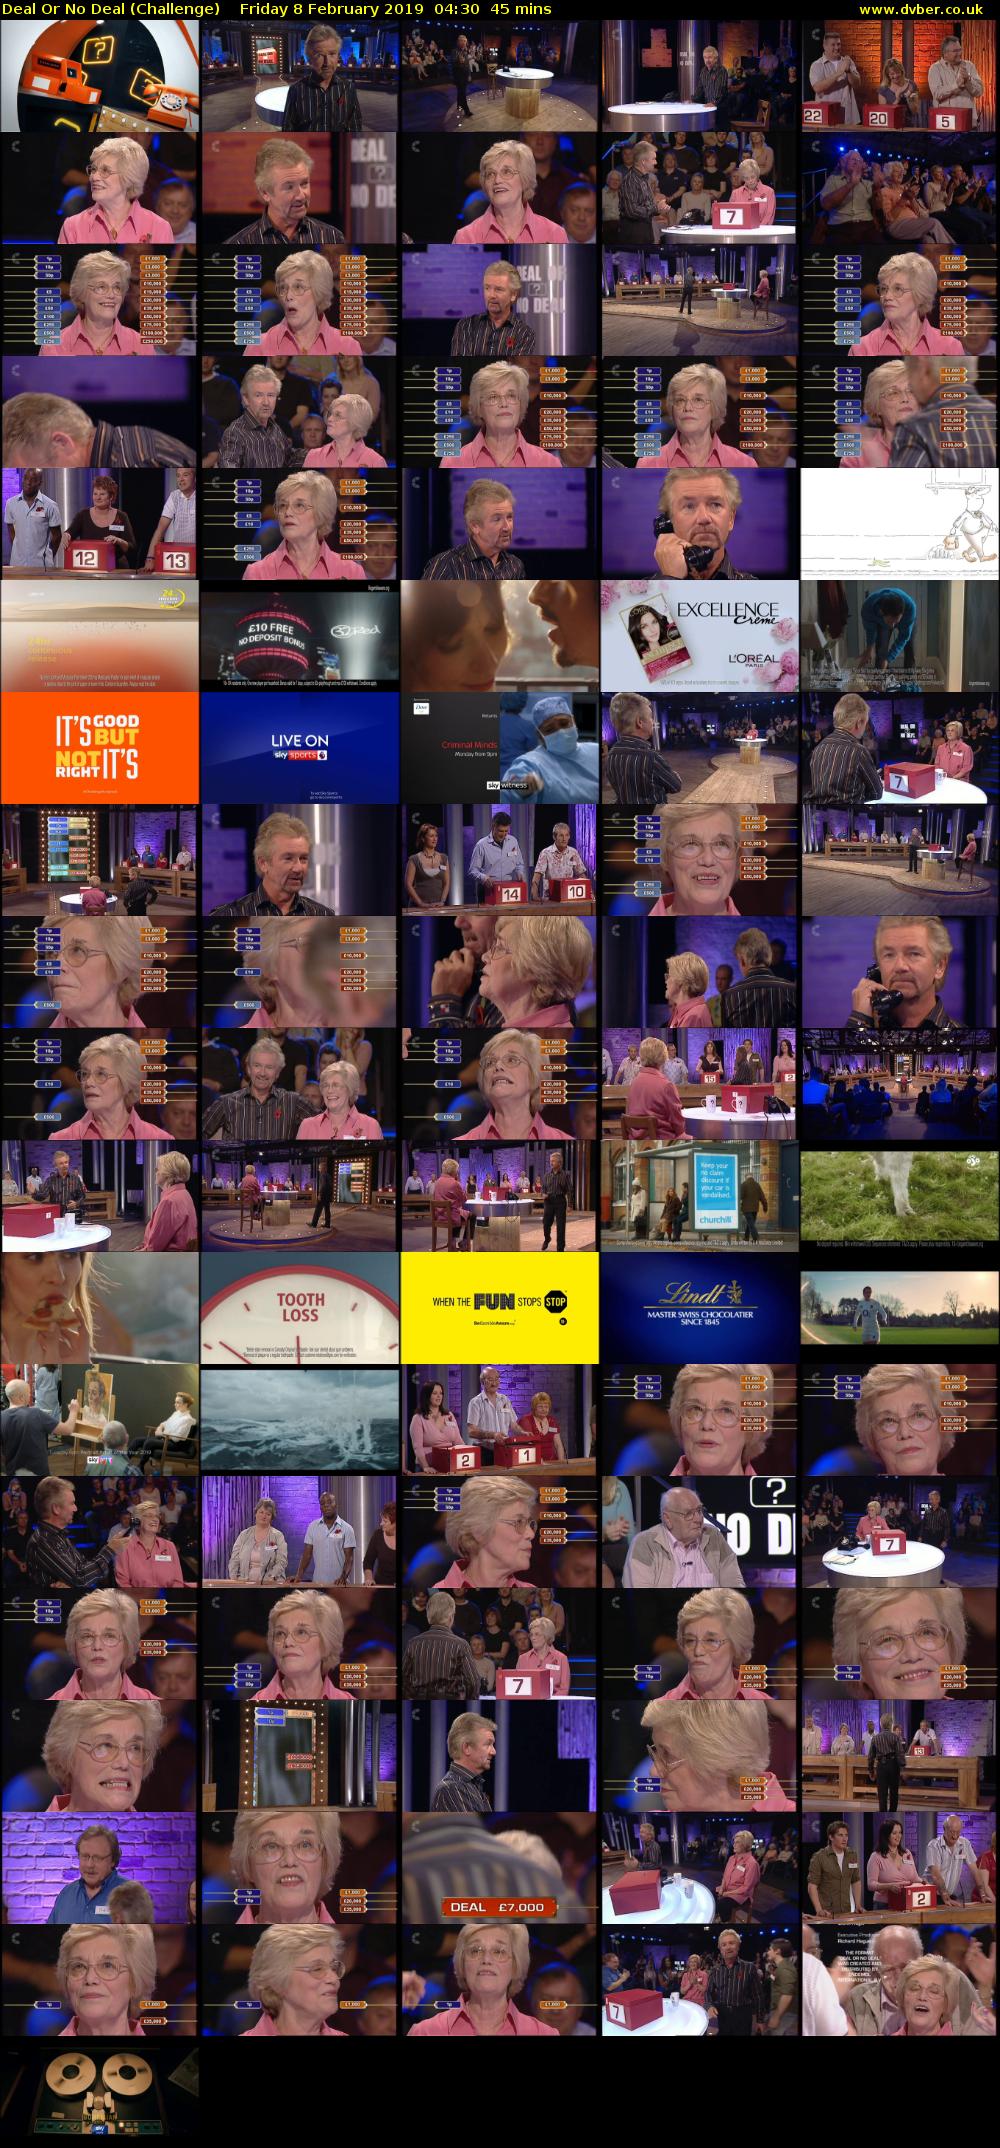 Deal Or No Deal (Challenge) Friday 8 February 2019 04:30 - 05:15